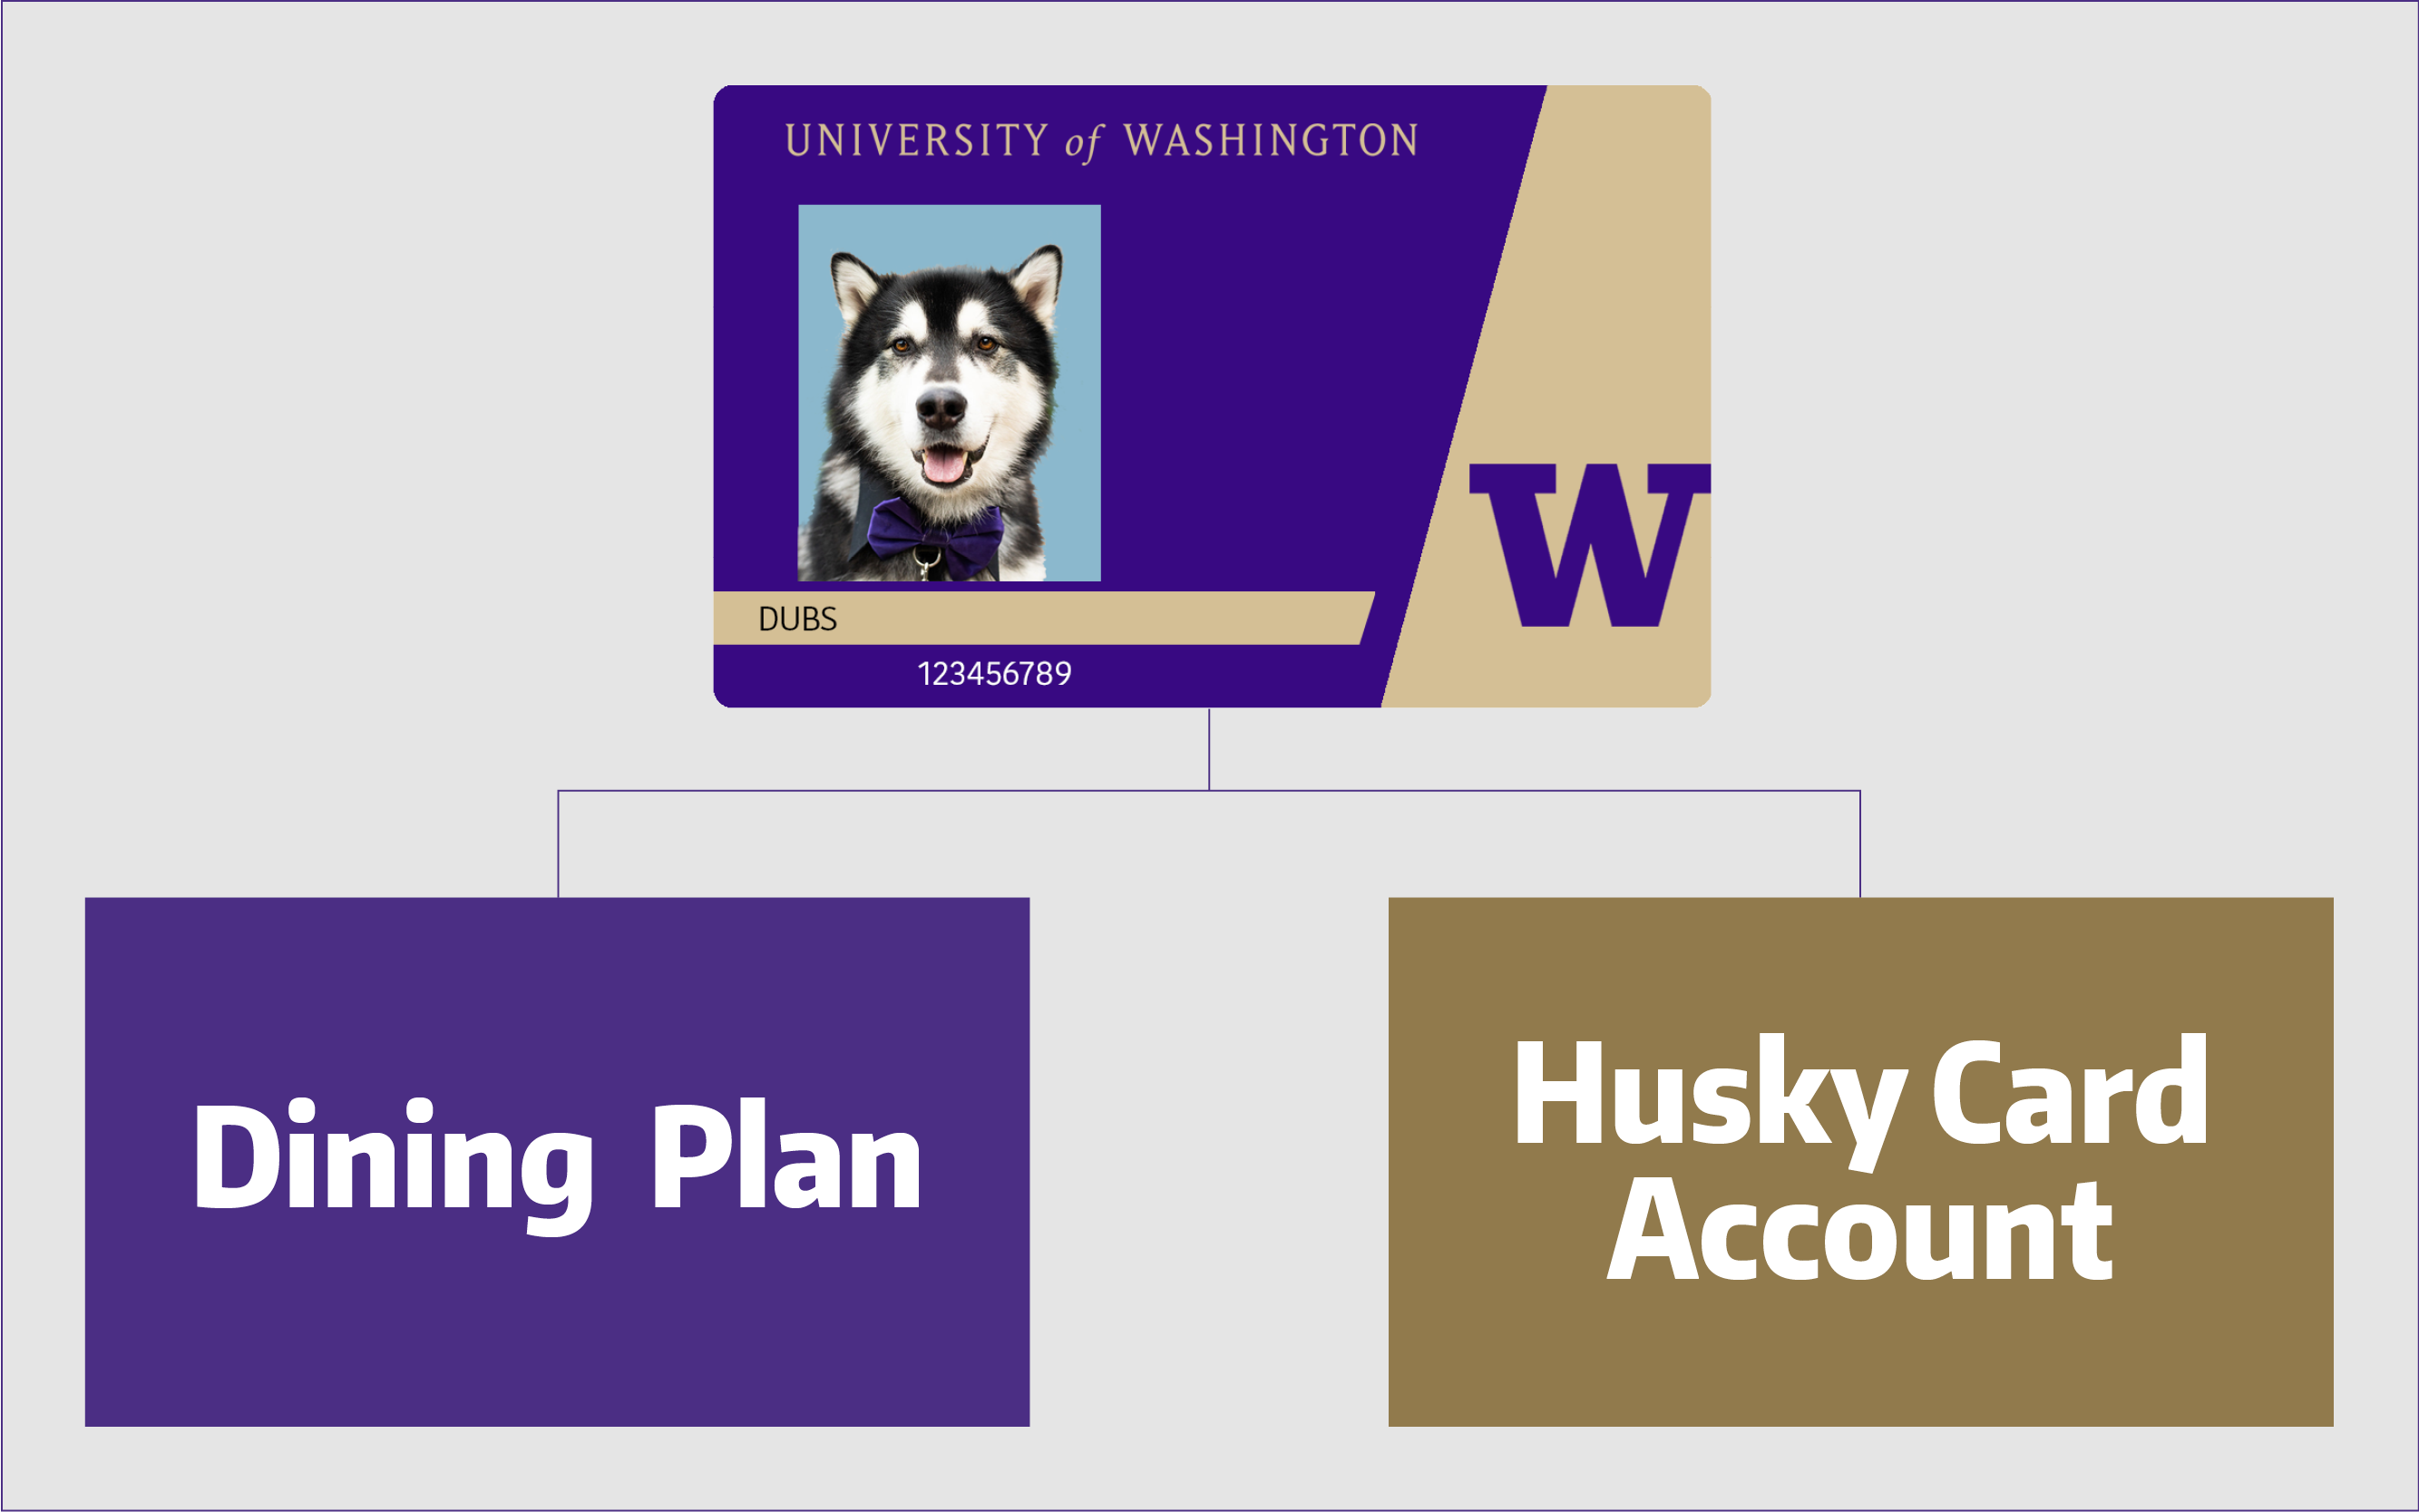 Husky Card, one card with two accounts